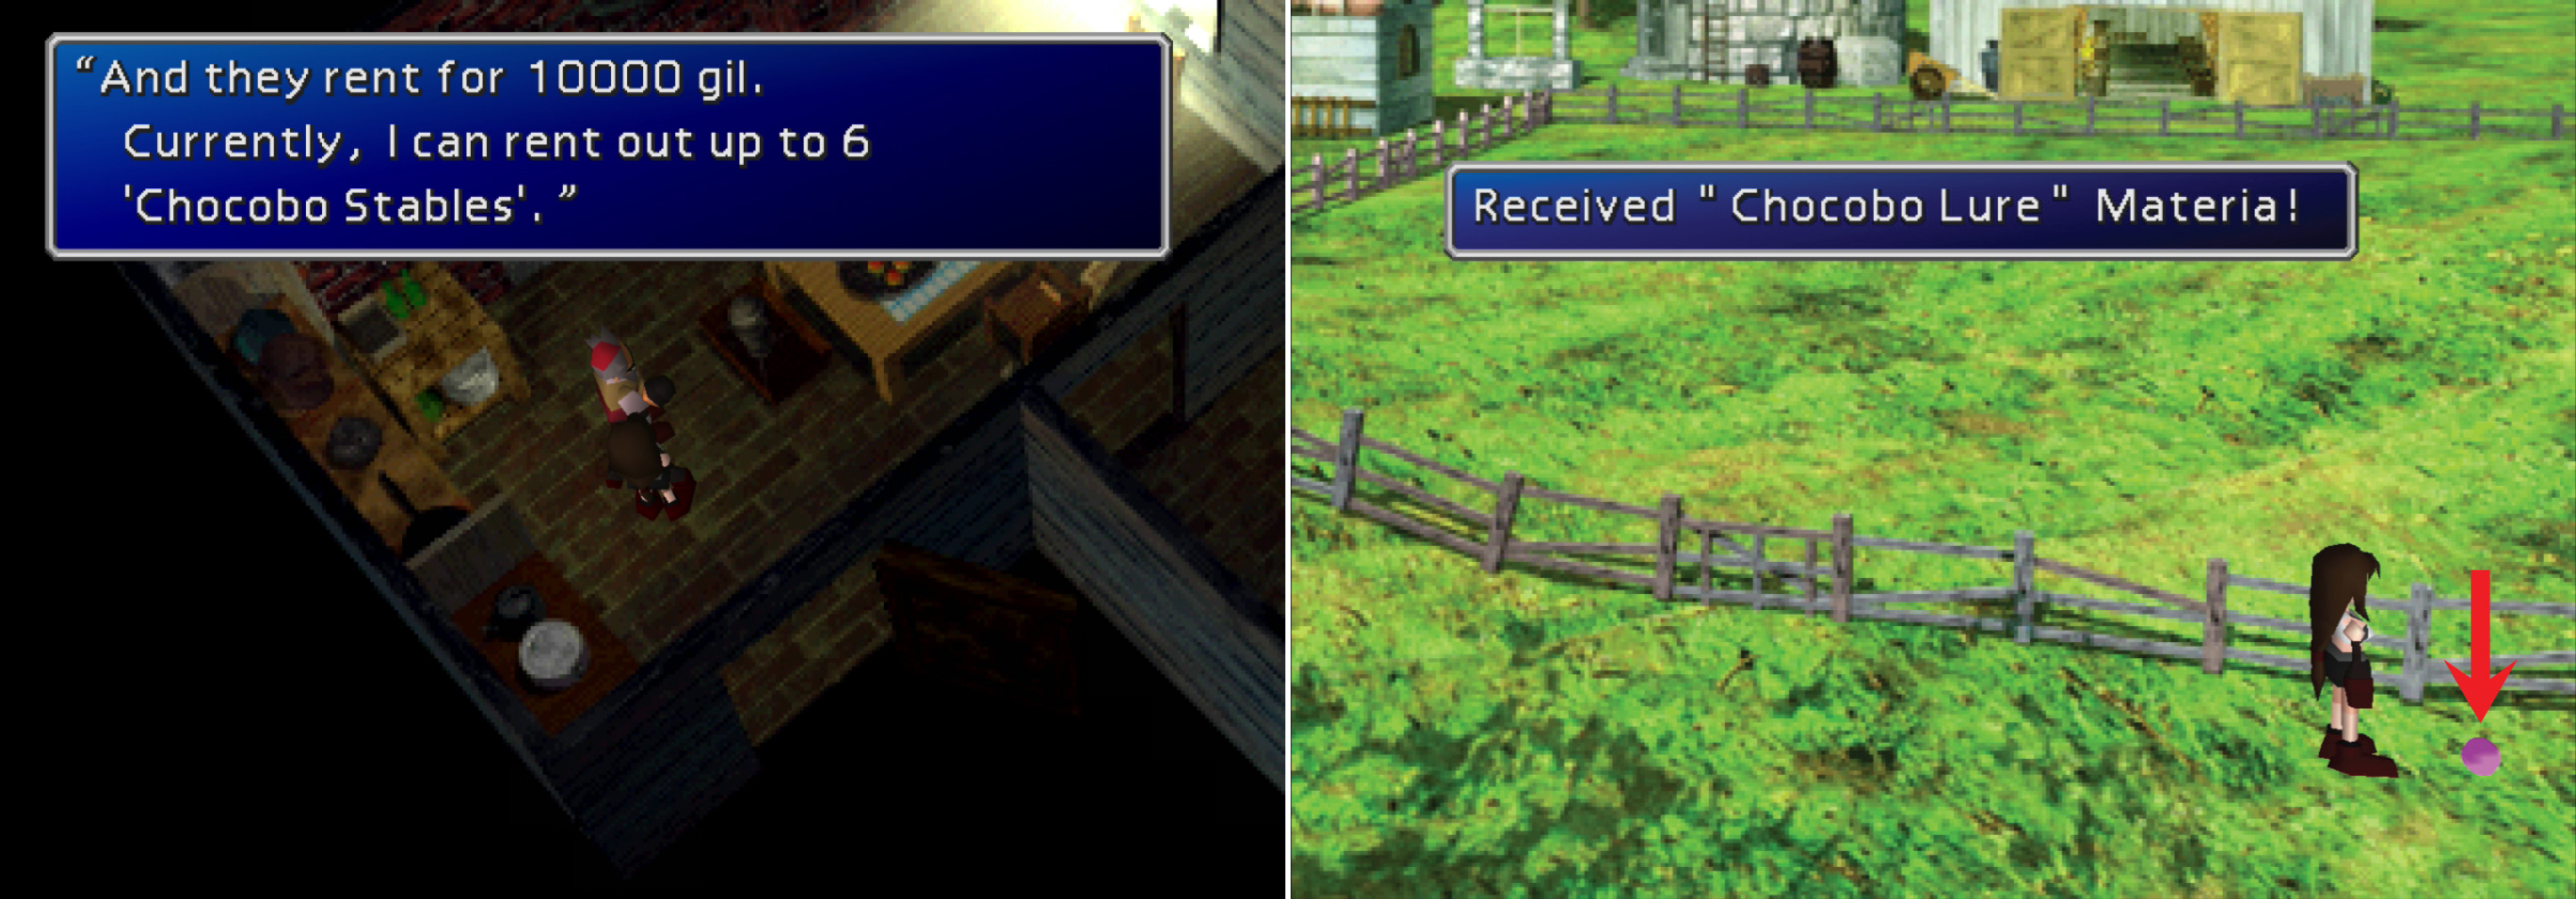 There’s no better time to rent Chocobo stables now that the world is ending… because reasons! They don’t come cheap, however… (left). You can also obtain another piece of Chocobo Lure Materia (right).